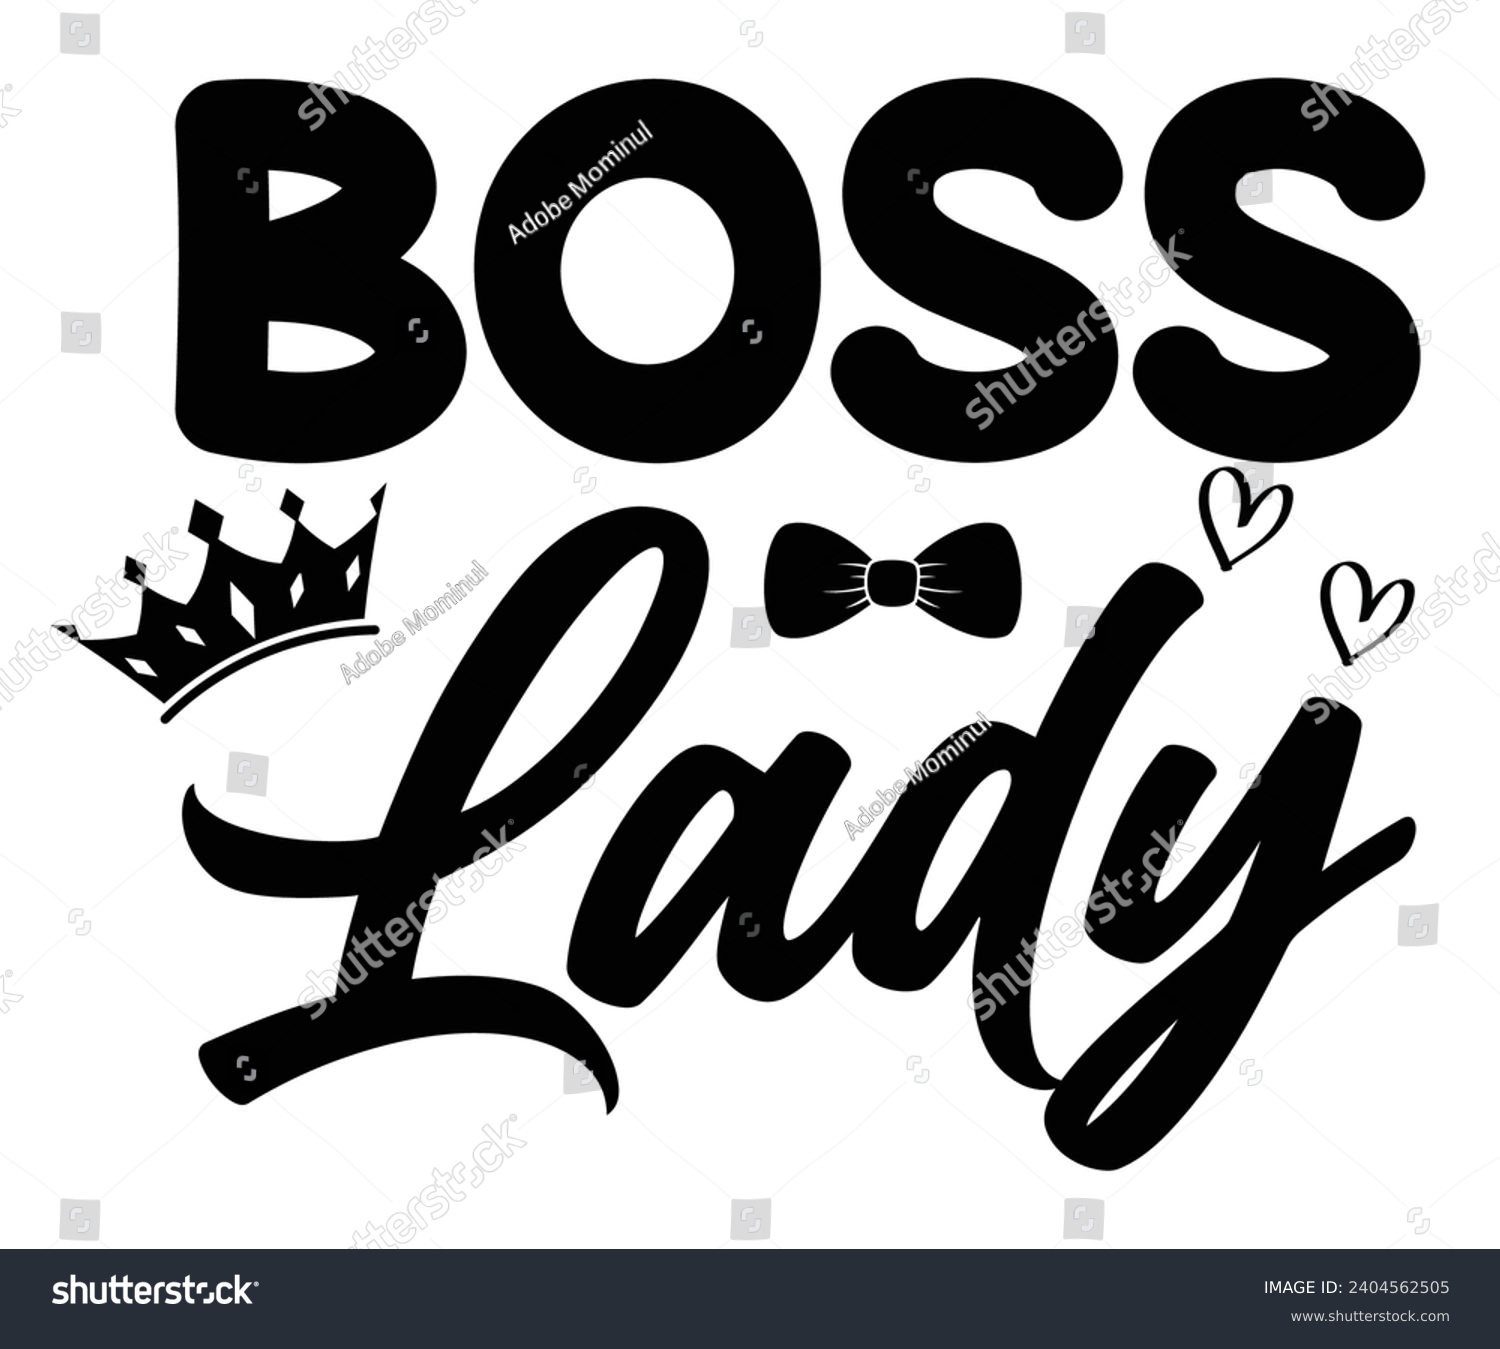 SVG of Boss Lady Svg,Happy Boss Day svg,Boss Saying Quotes,Boss Day T-shirt,Gift for Boss,Great Jobs,Happy Bosses Day t-shirt,Girl Boss Shirt,Motivational Boss,Cut File,Circut And Silhouette,Commercial Use svg